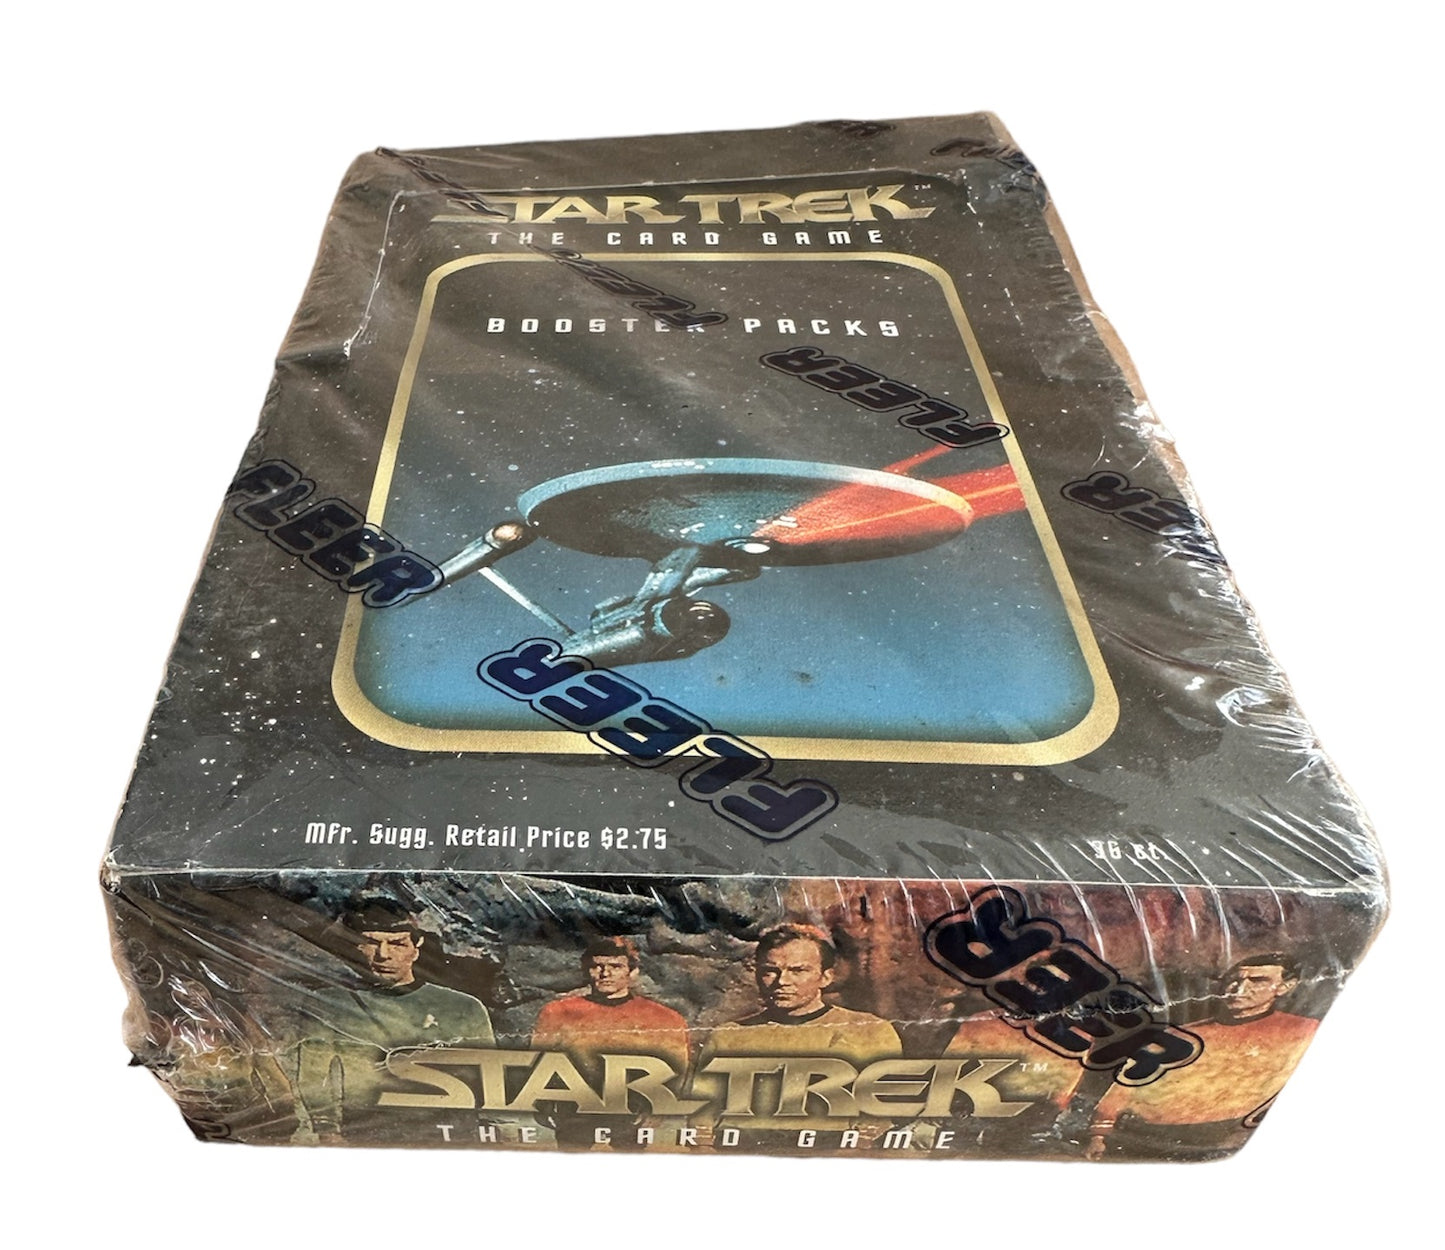 Vintage Skybox/Fleer 1996 Star Trek The Original Series - The Card Game Booster Packs - Sealed Box With 36 Packs - Brand New Factory Sealed Shop Stock Room Find